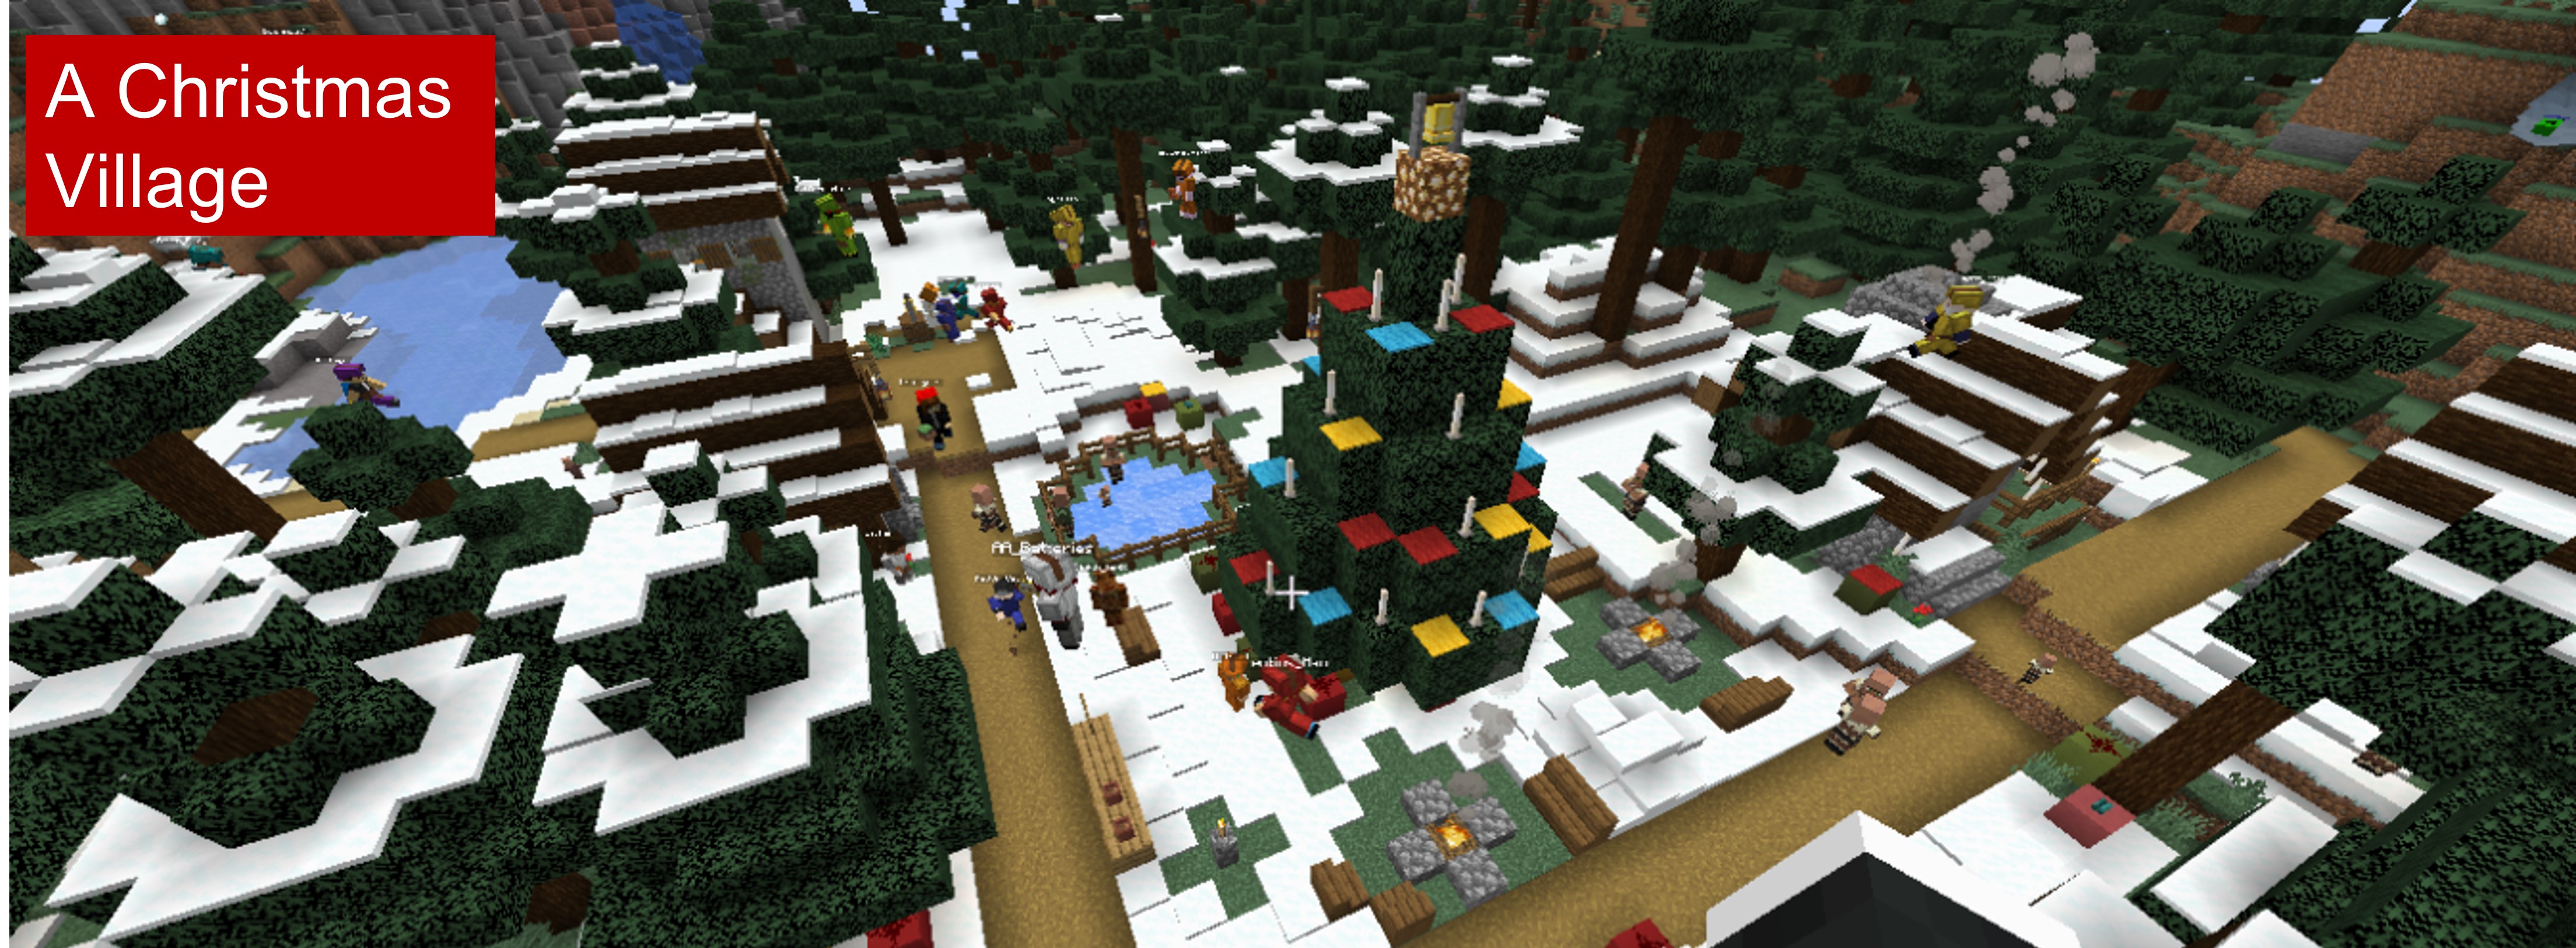 A Minecraft village decorated for Christmas with a colourful tree and an ice rink